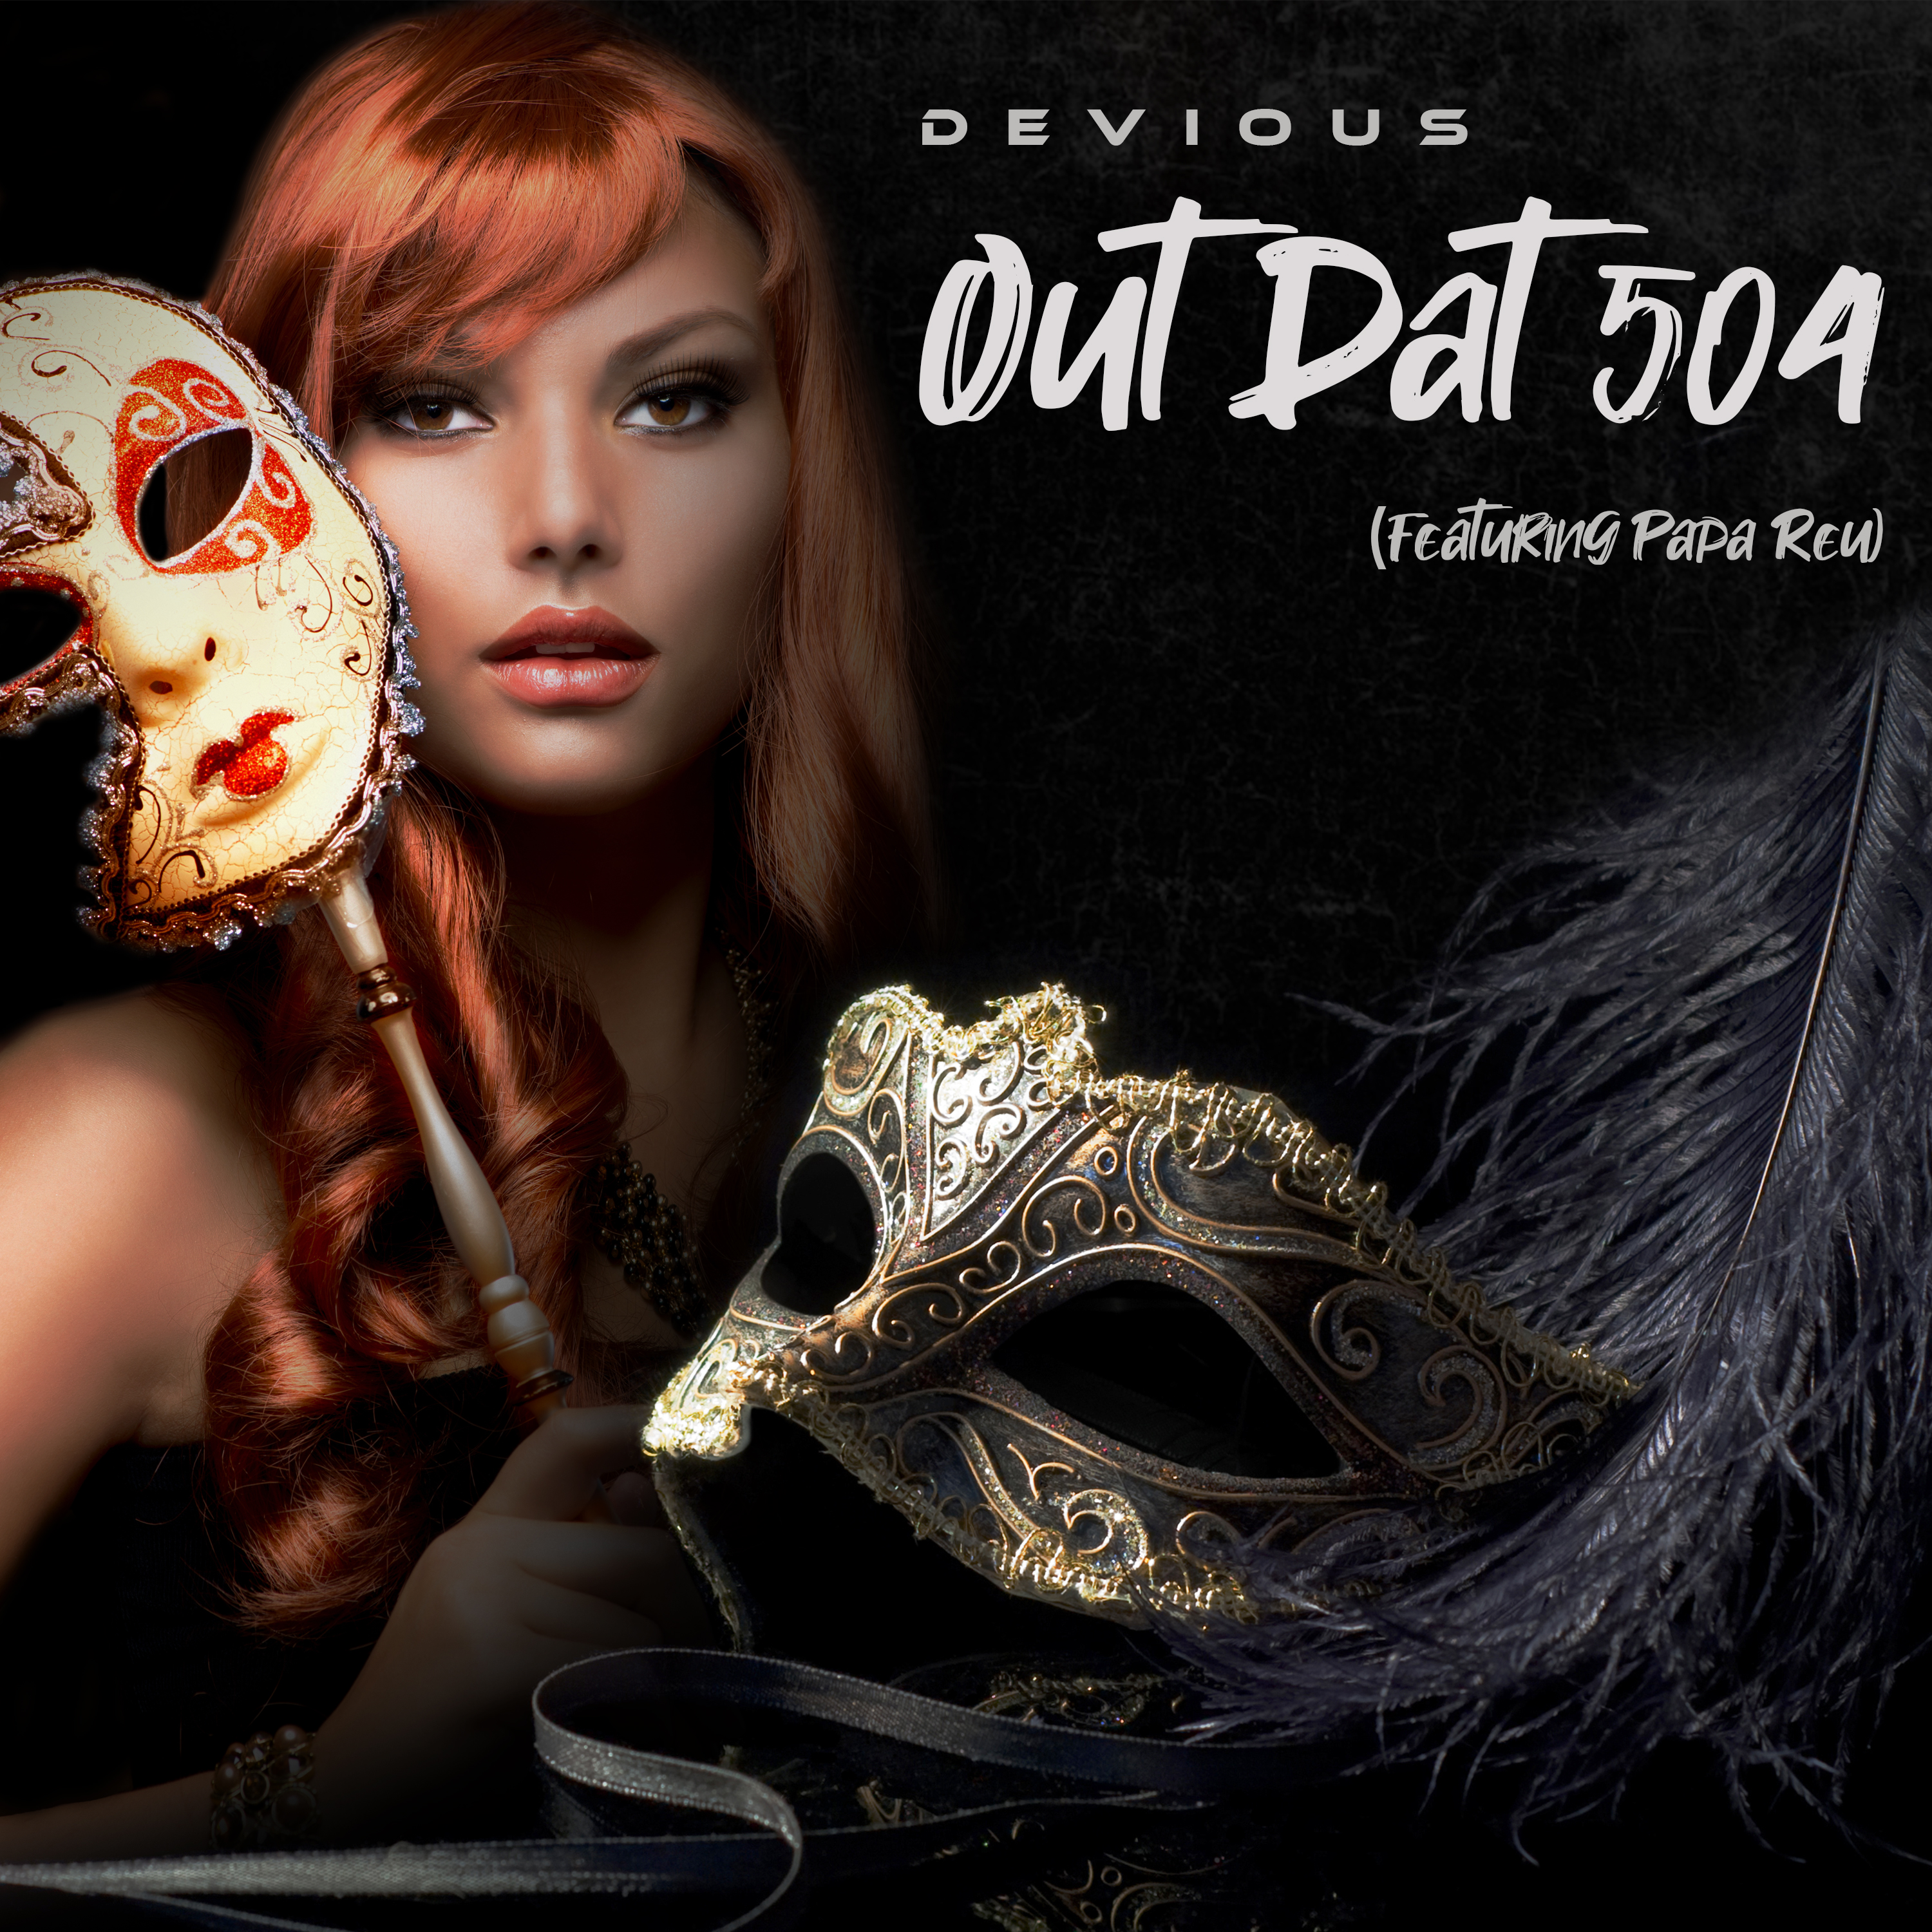 Art for Out Dat 504 feat.Papa Reu by Devious